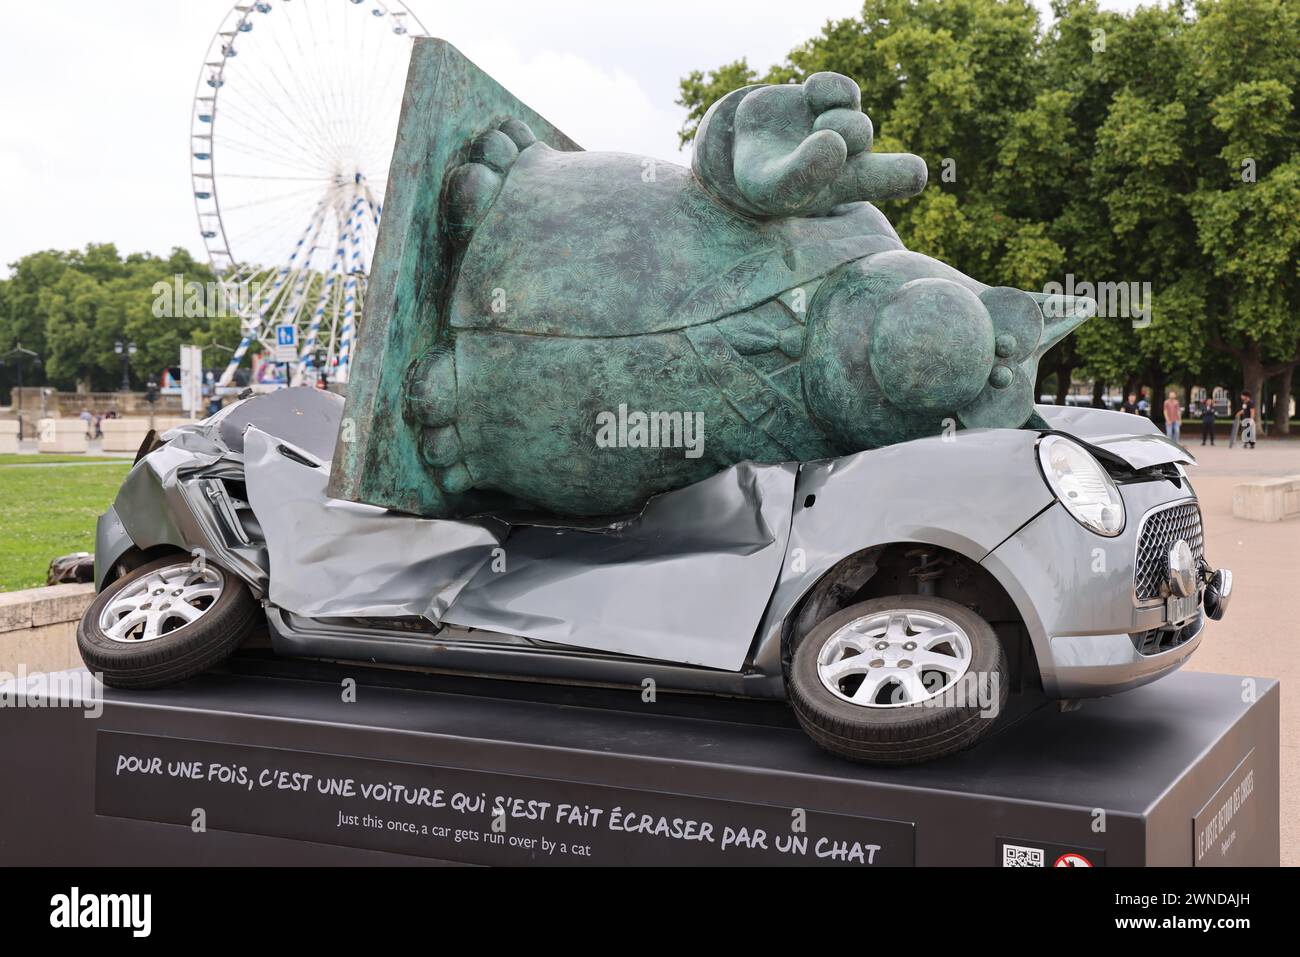 The fair return of things. For once it was a car that was run over by a cat. Exhibition on the quays of Bordeaux on the banks of the Garonne river of Stock Photo